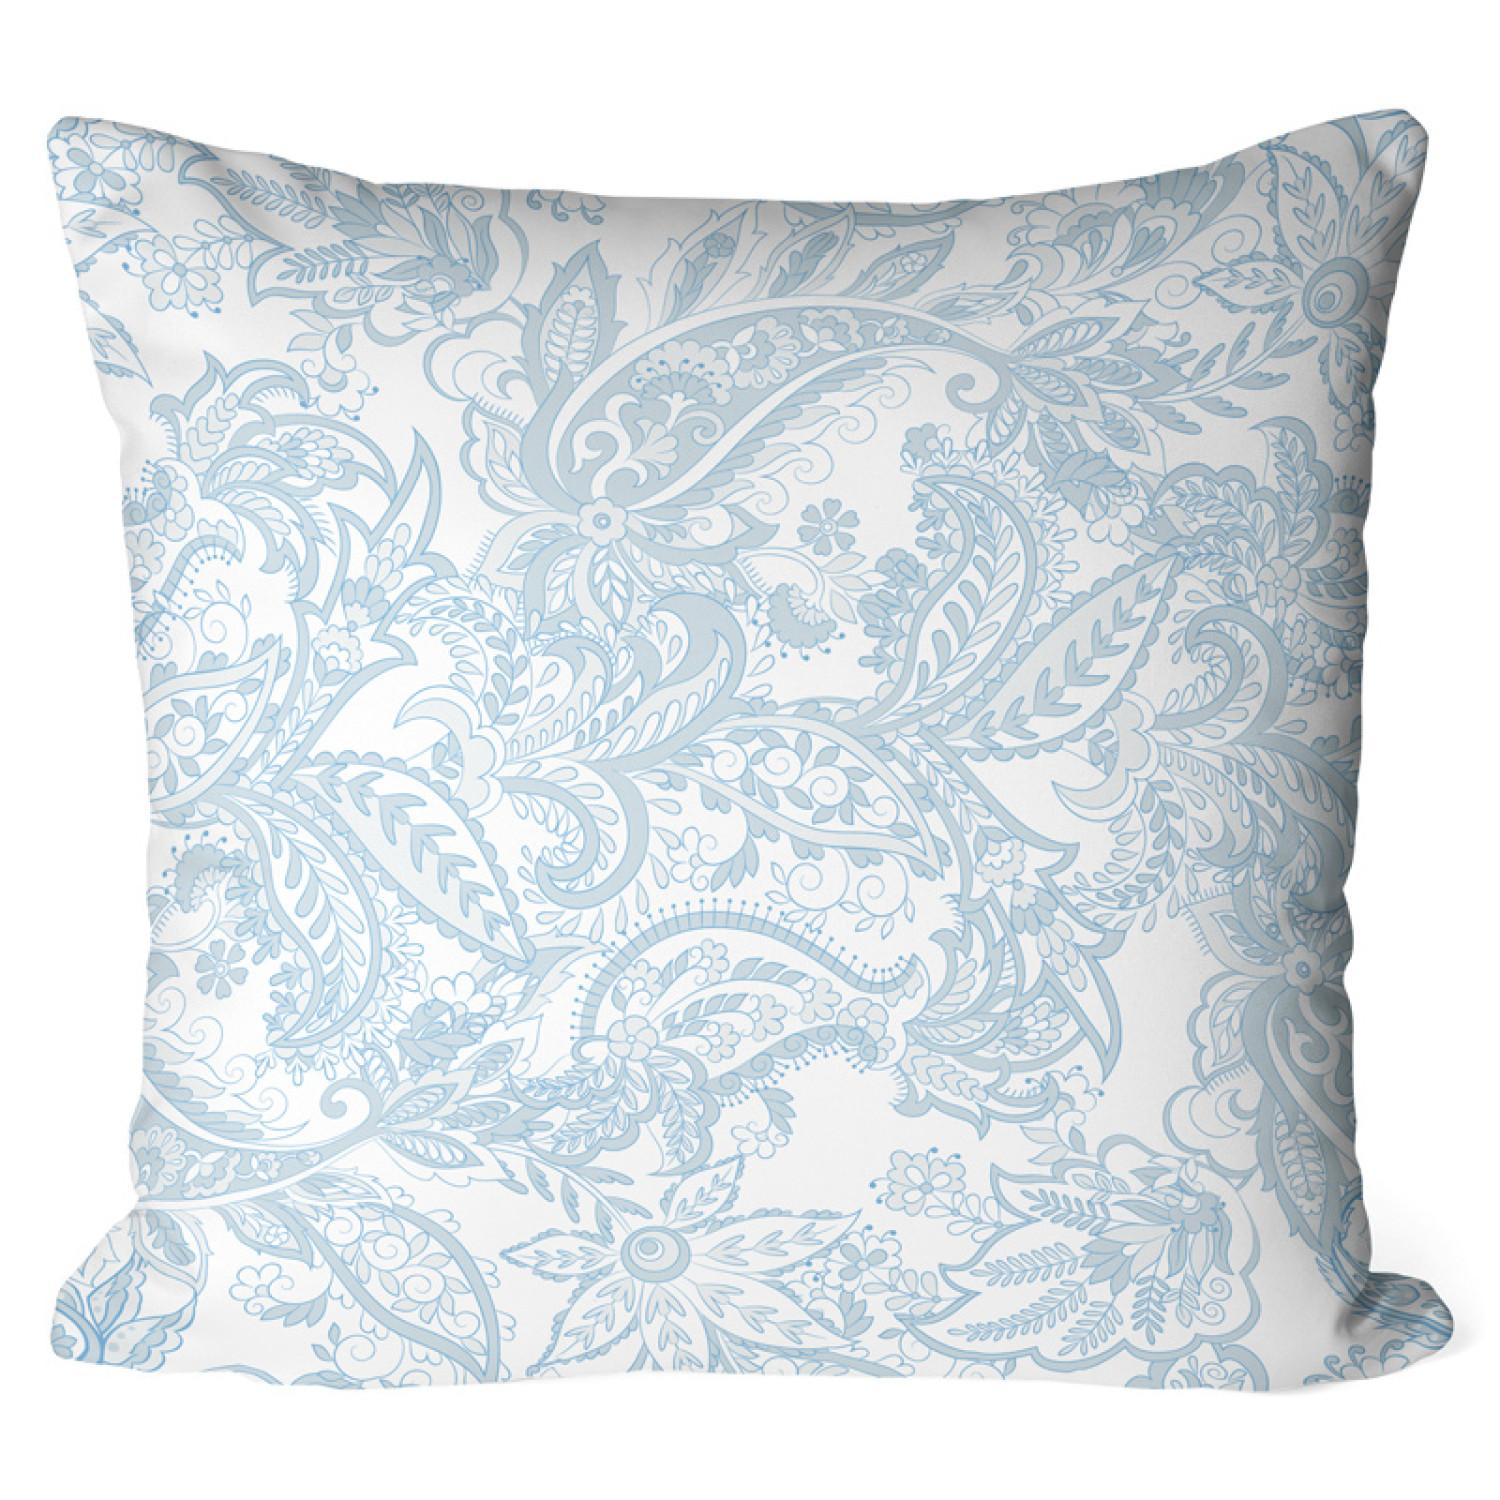 Decorative Microfiber Pillow The delicacy of nature - flowers and leaves in white and blue cushions